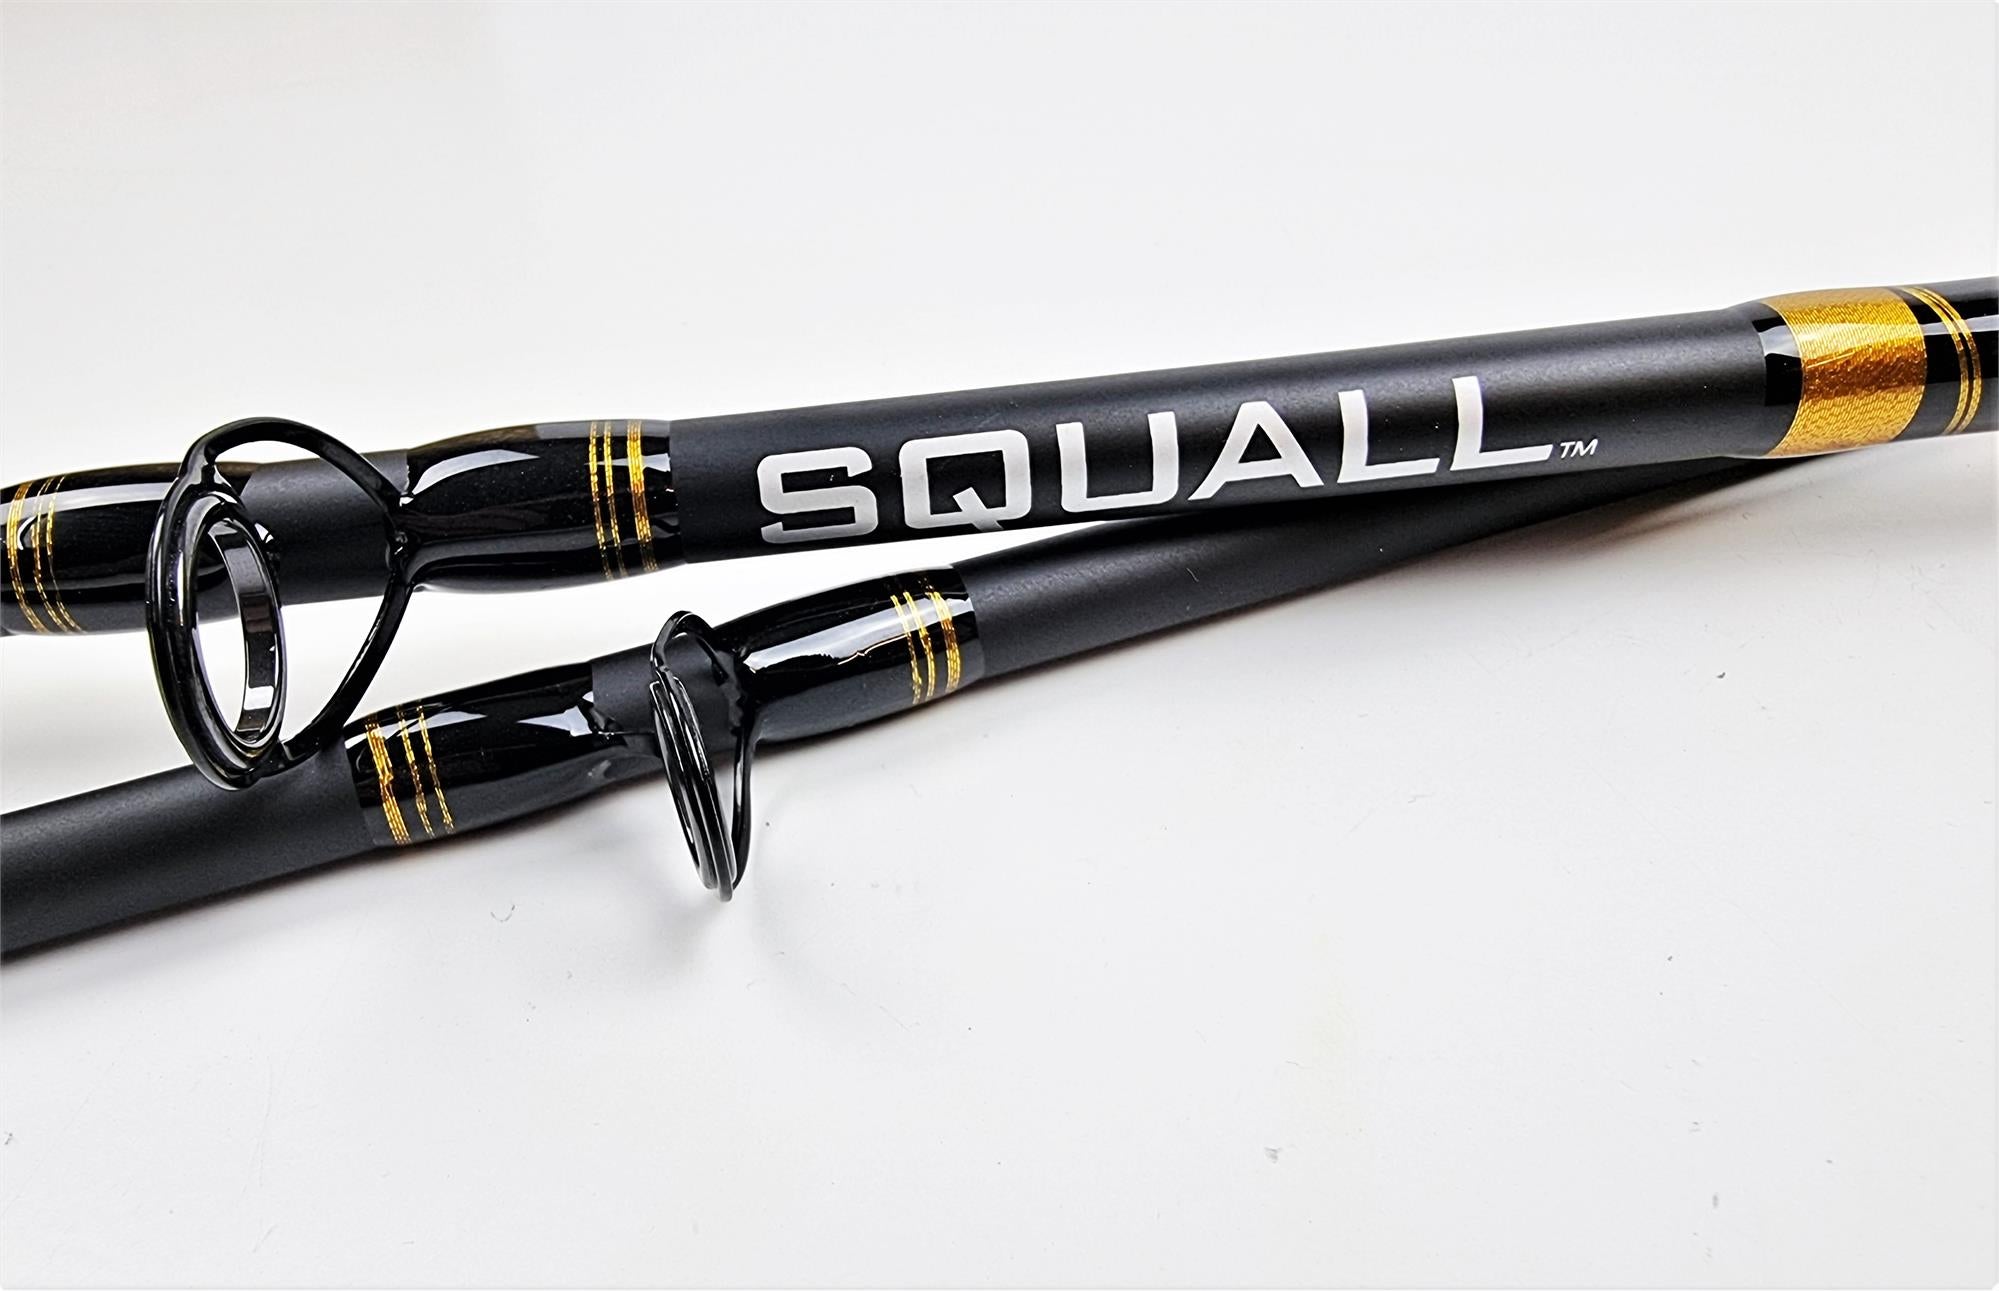 Penn 7ft/2.13m Squall 2 Section Boat Rod (30lbs) – Landers Outdoor